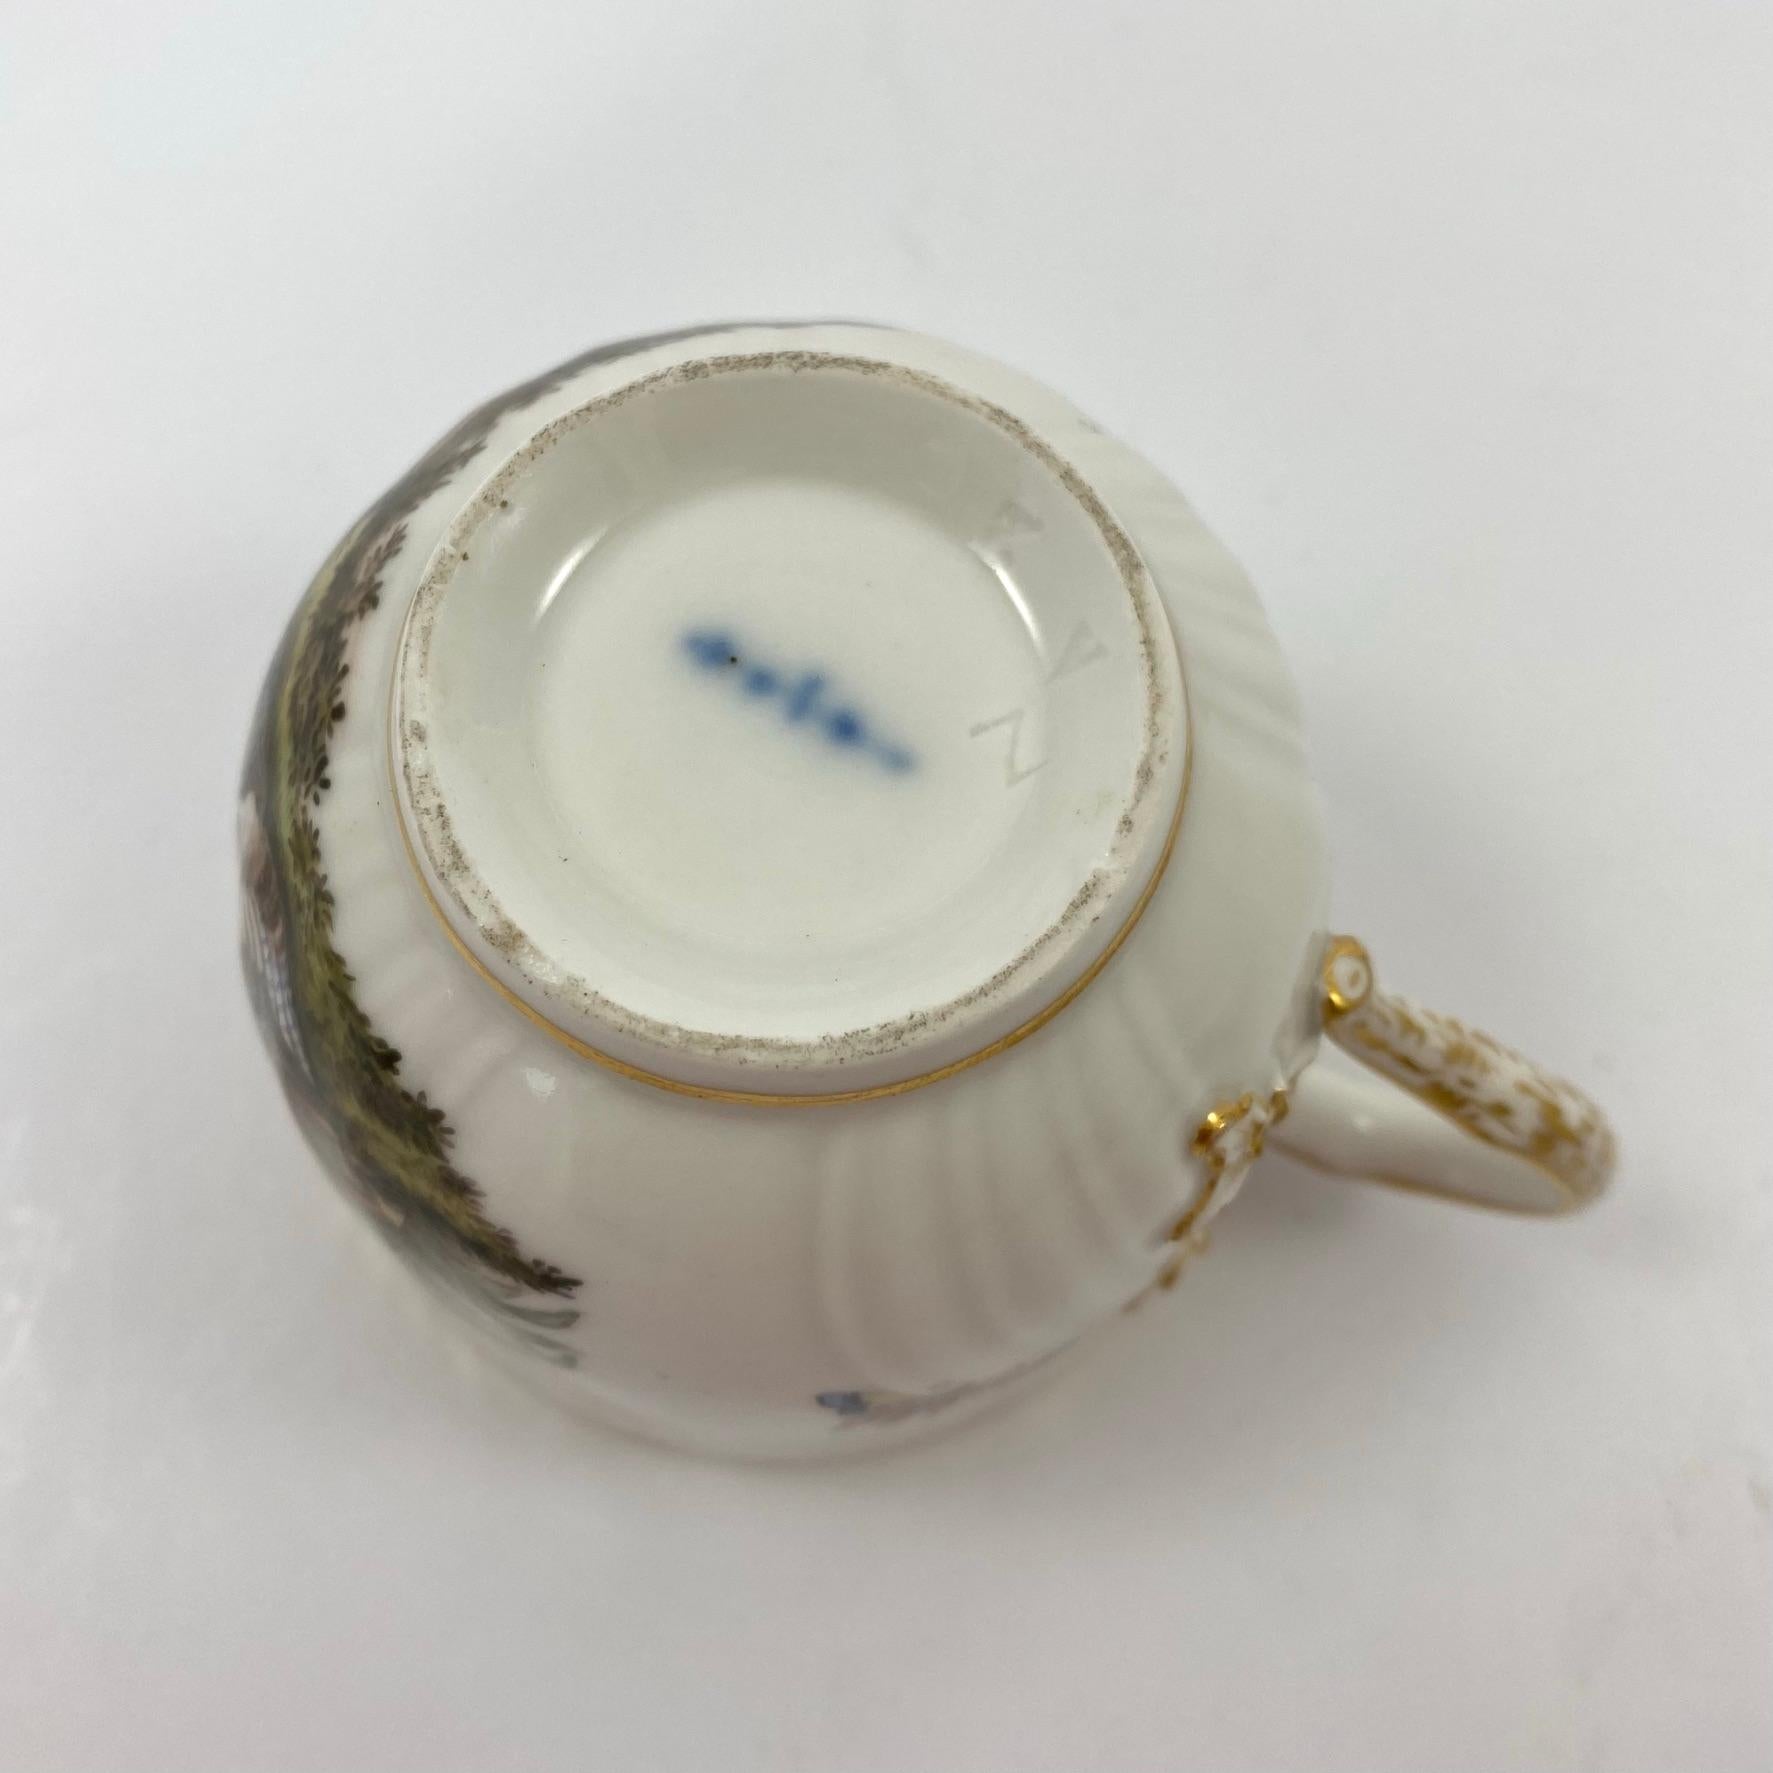 Late 19th Century KPM Berlin Porcelain Cup and Saucer, c. 1870